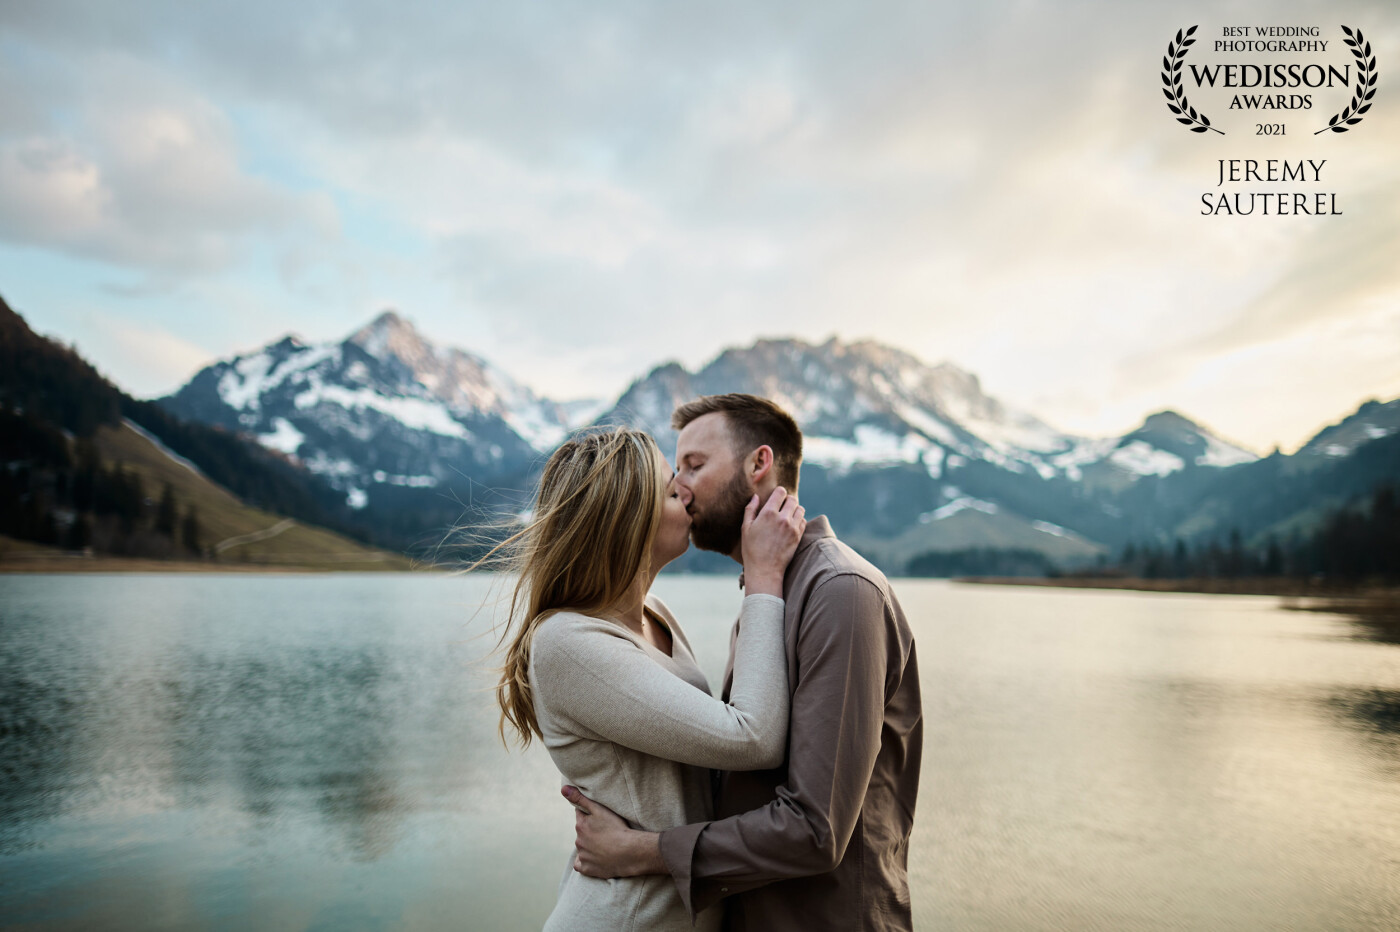 An engagement session as I like it! At the end of the session, a few minutes before drinking a small beer, the eyelash became magnificent! We were in an extraordinary place, at the edge of a mountain lake, the sky embellished this place even more and made this moment magical.